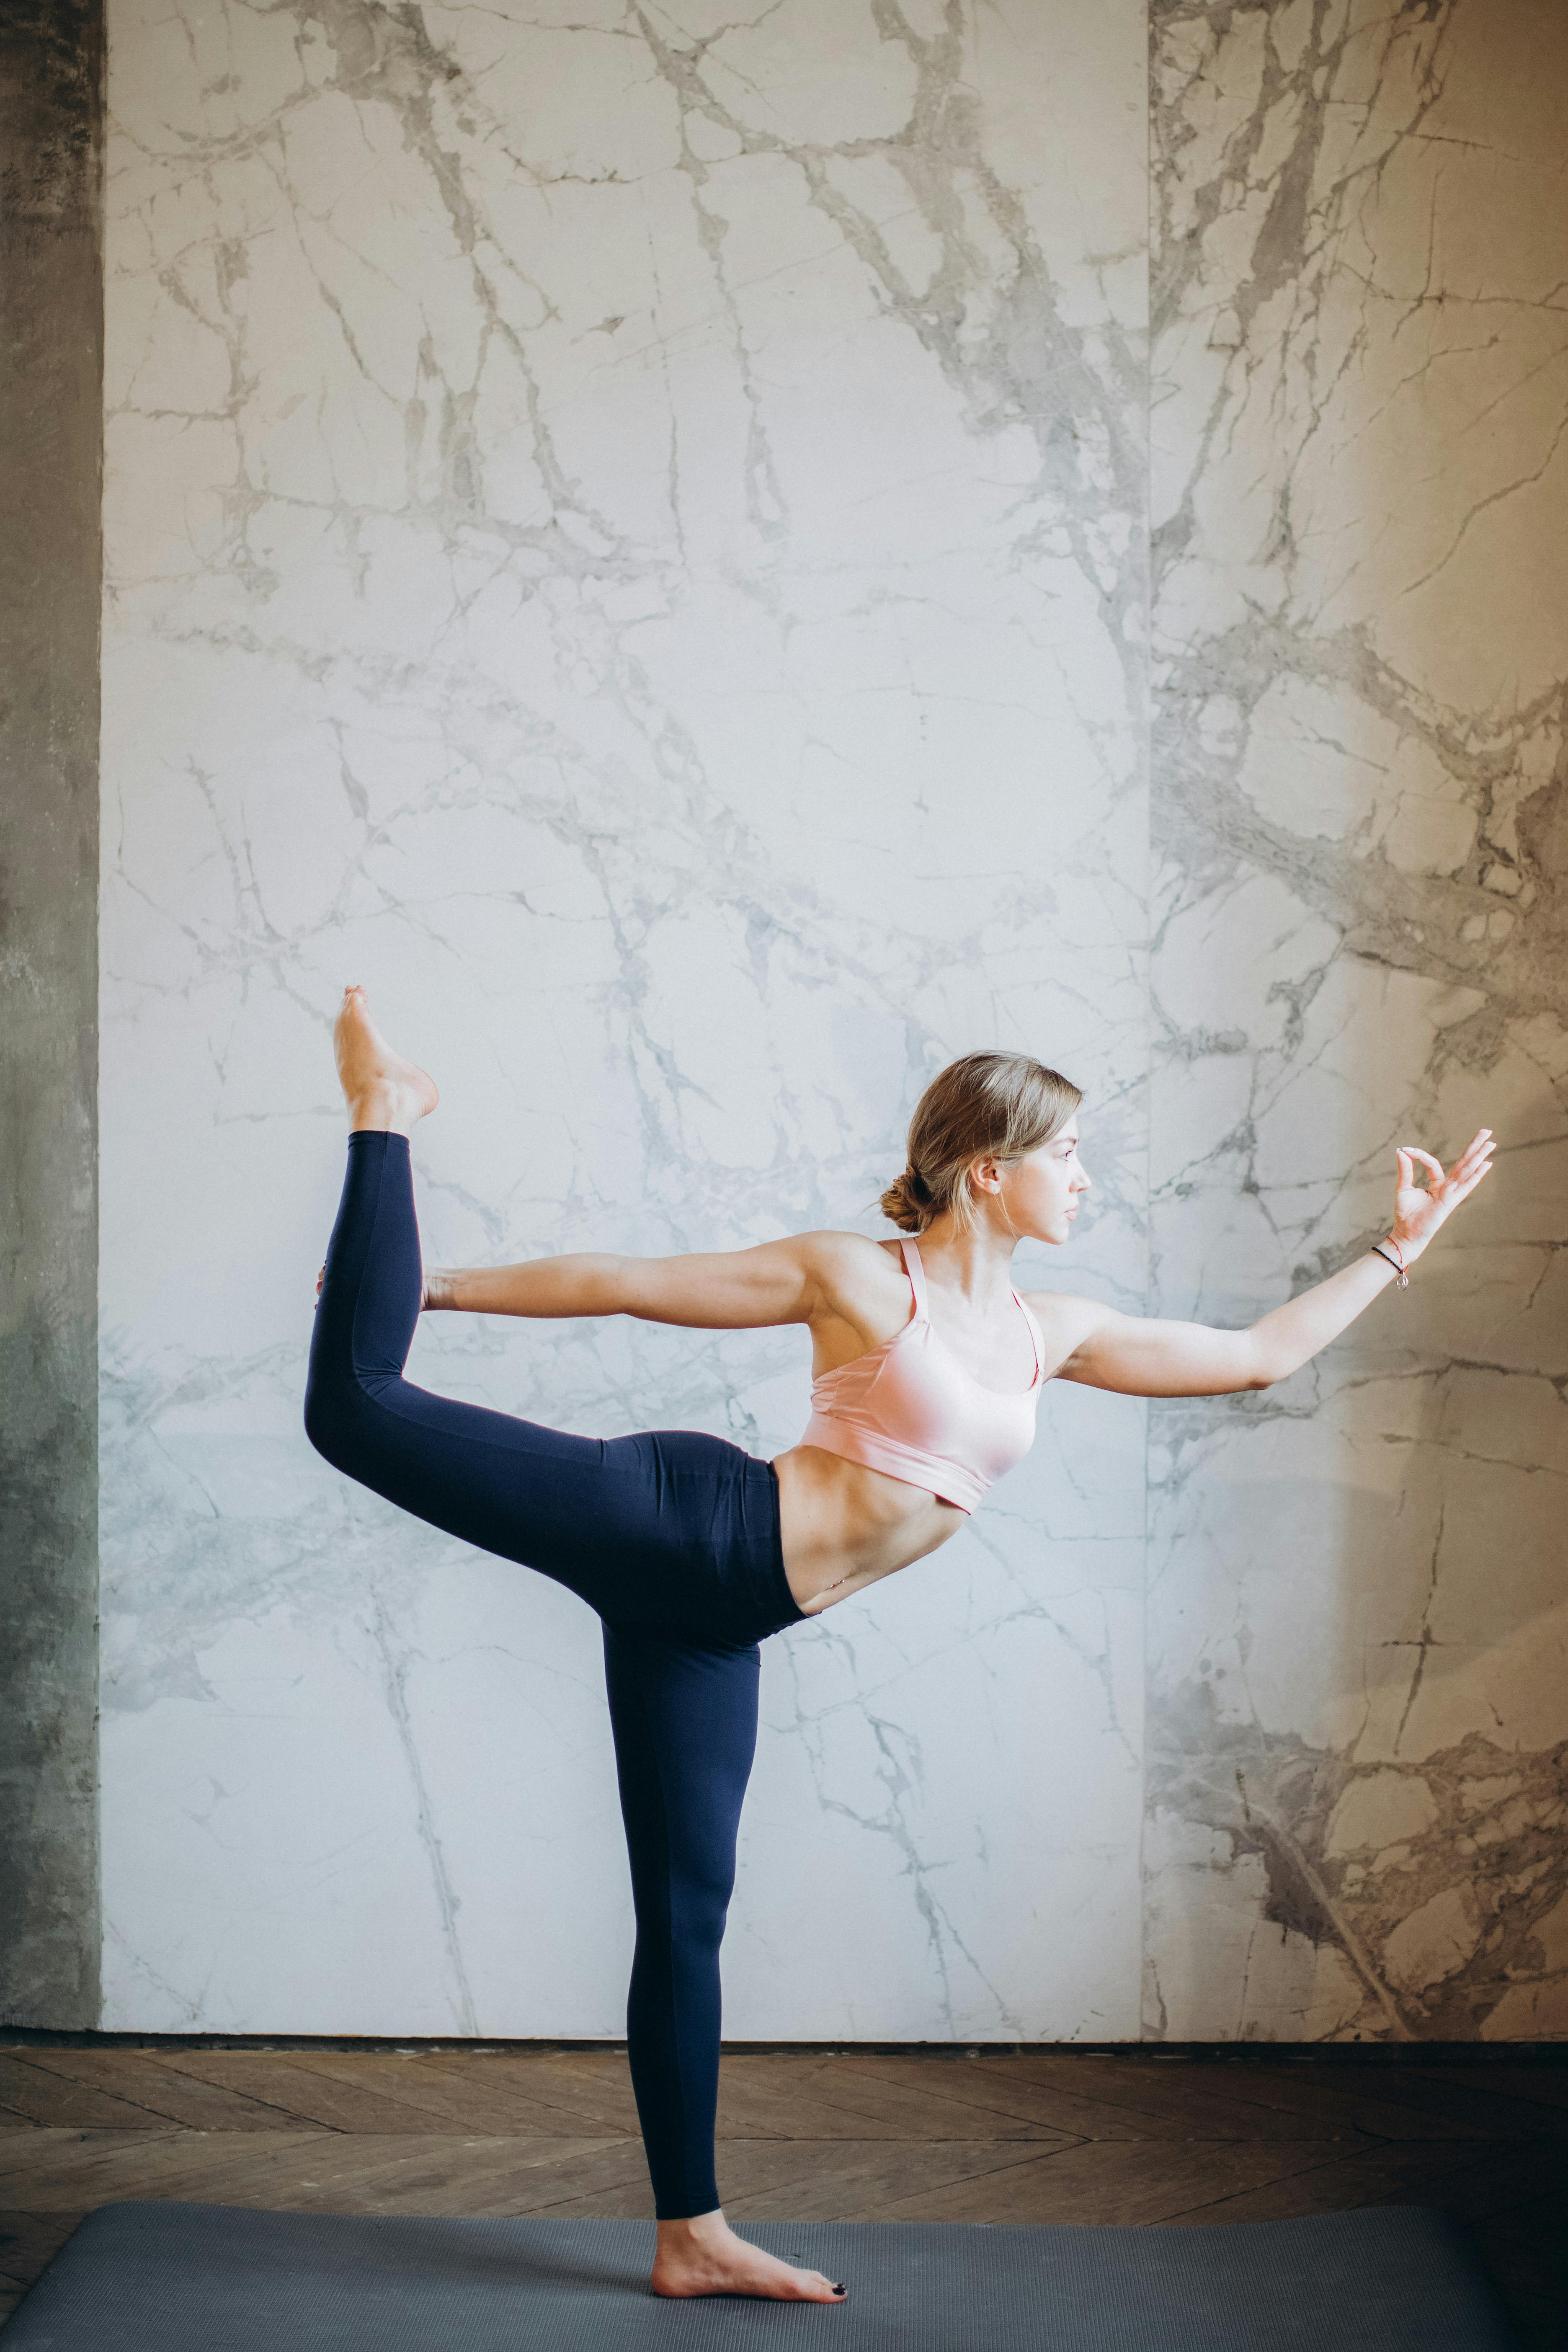 Surrealist Yoga Poses with Textured Plain Background | MUSE AI